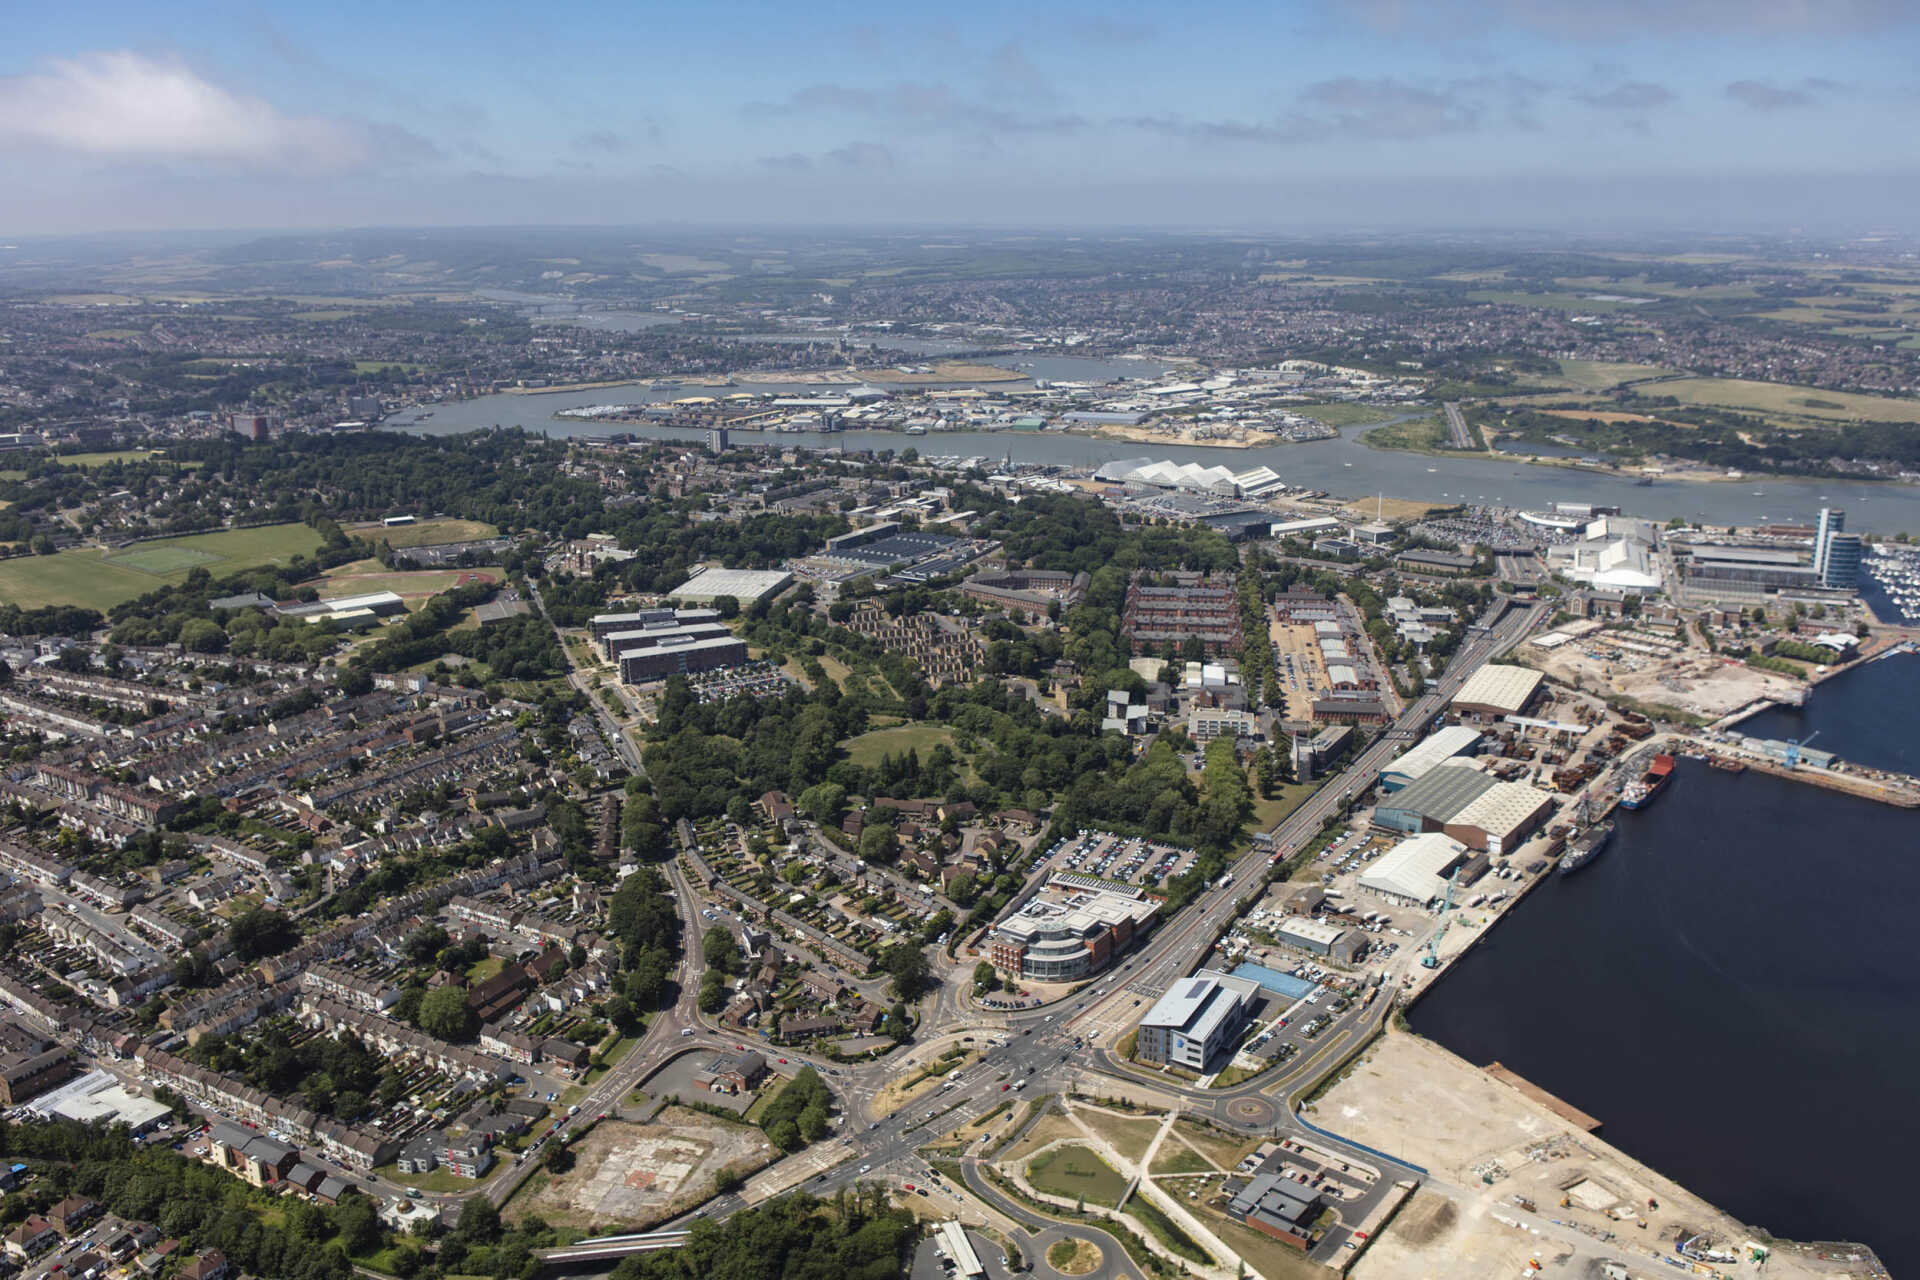 Ariel view of Medway campus